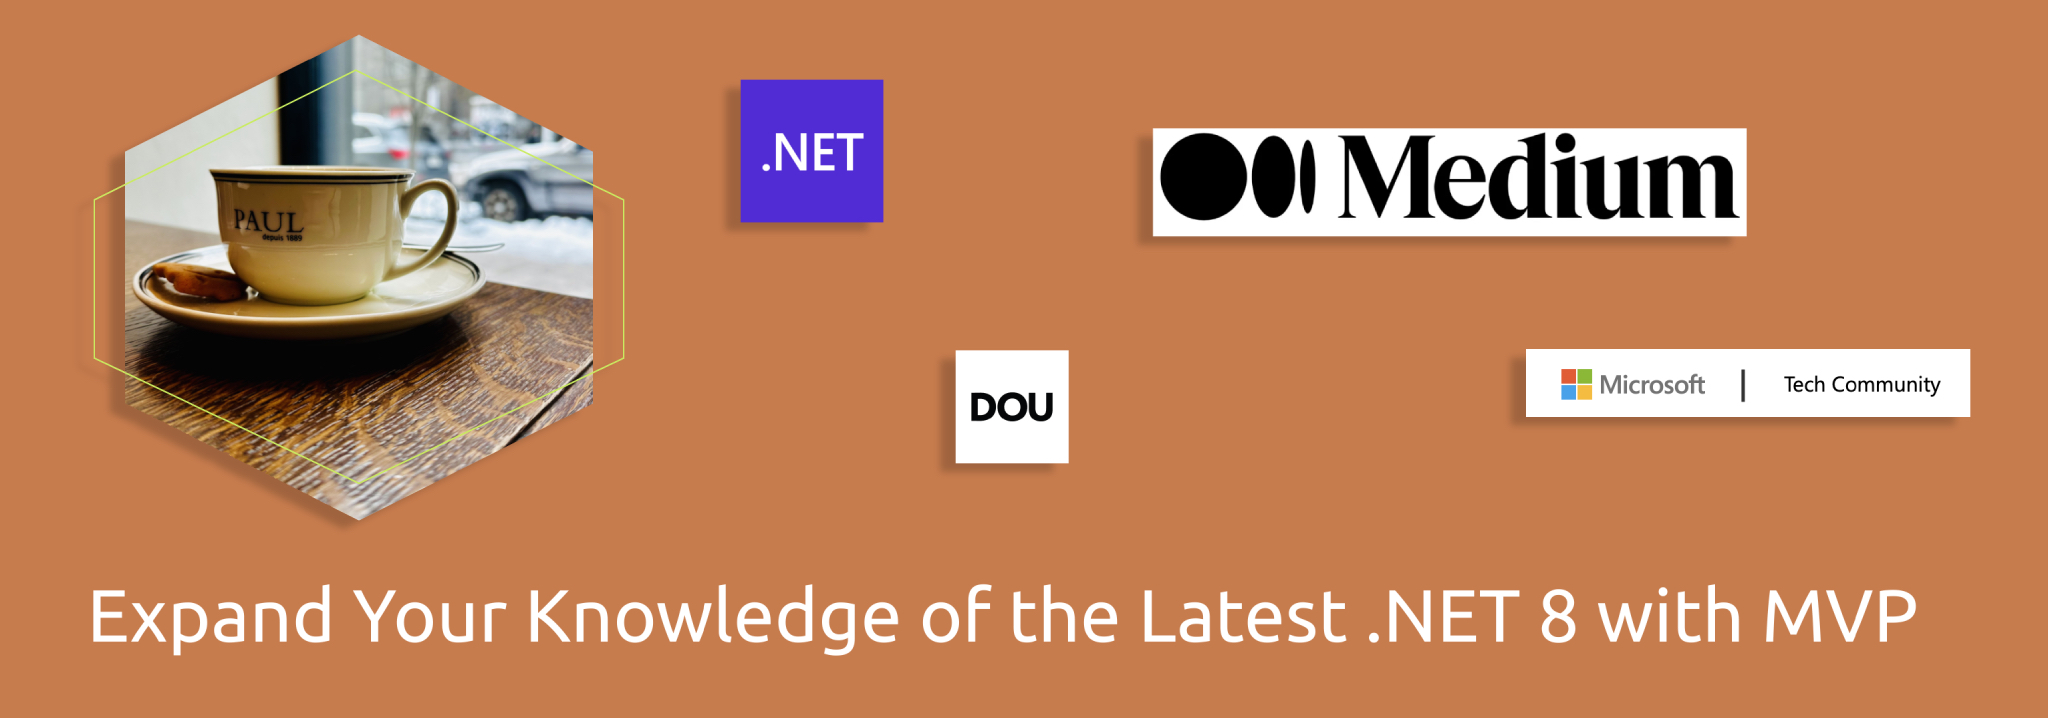 Expand Your Knowledge of the Latest .NET 8 with MVP